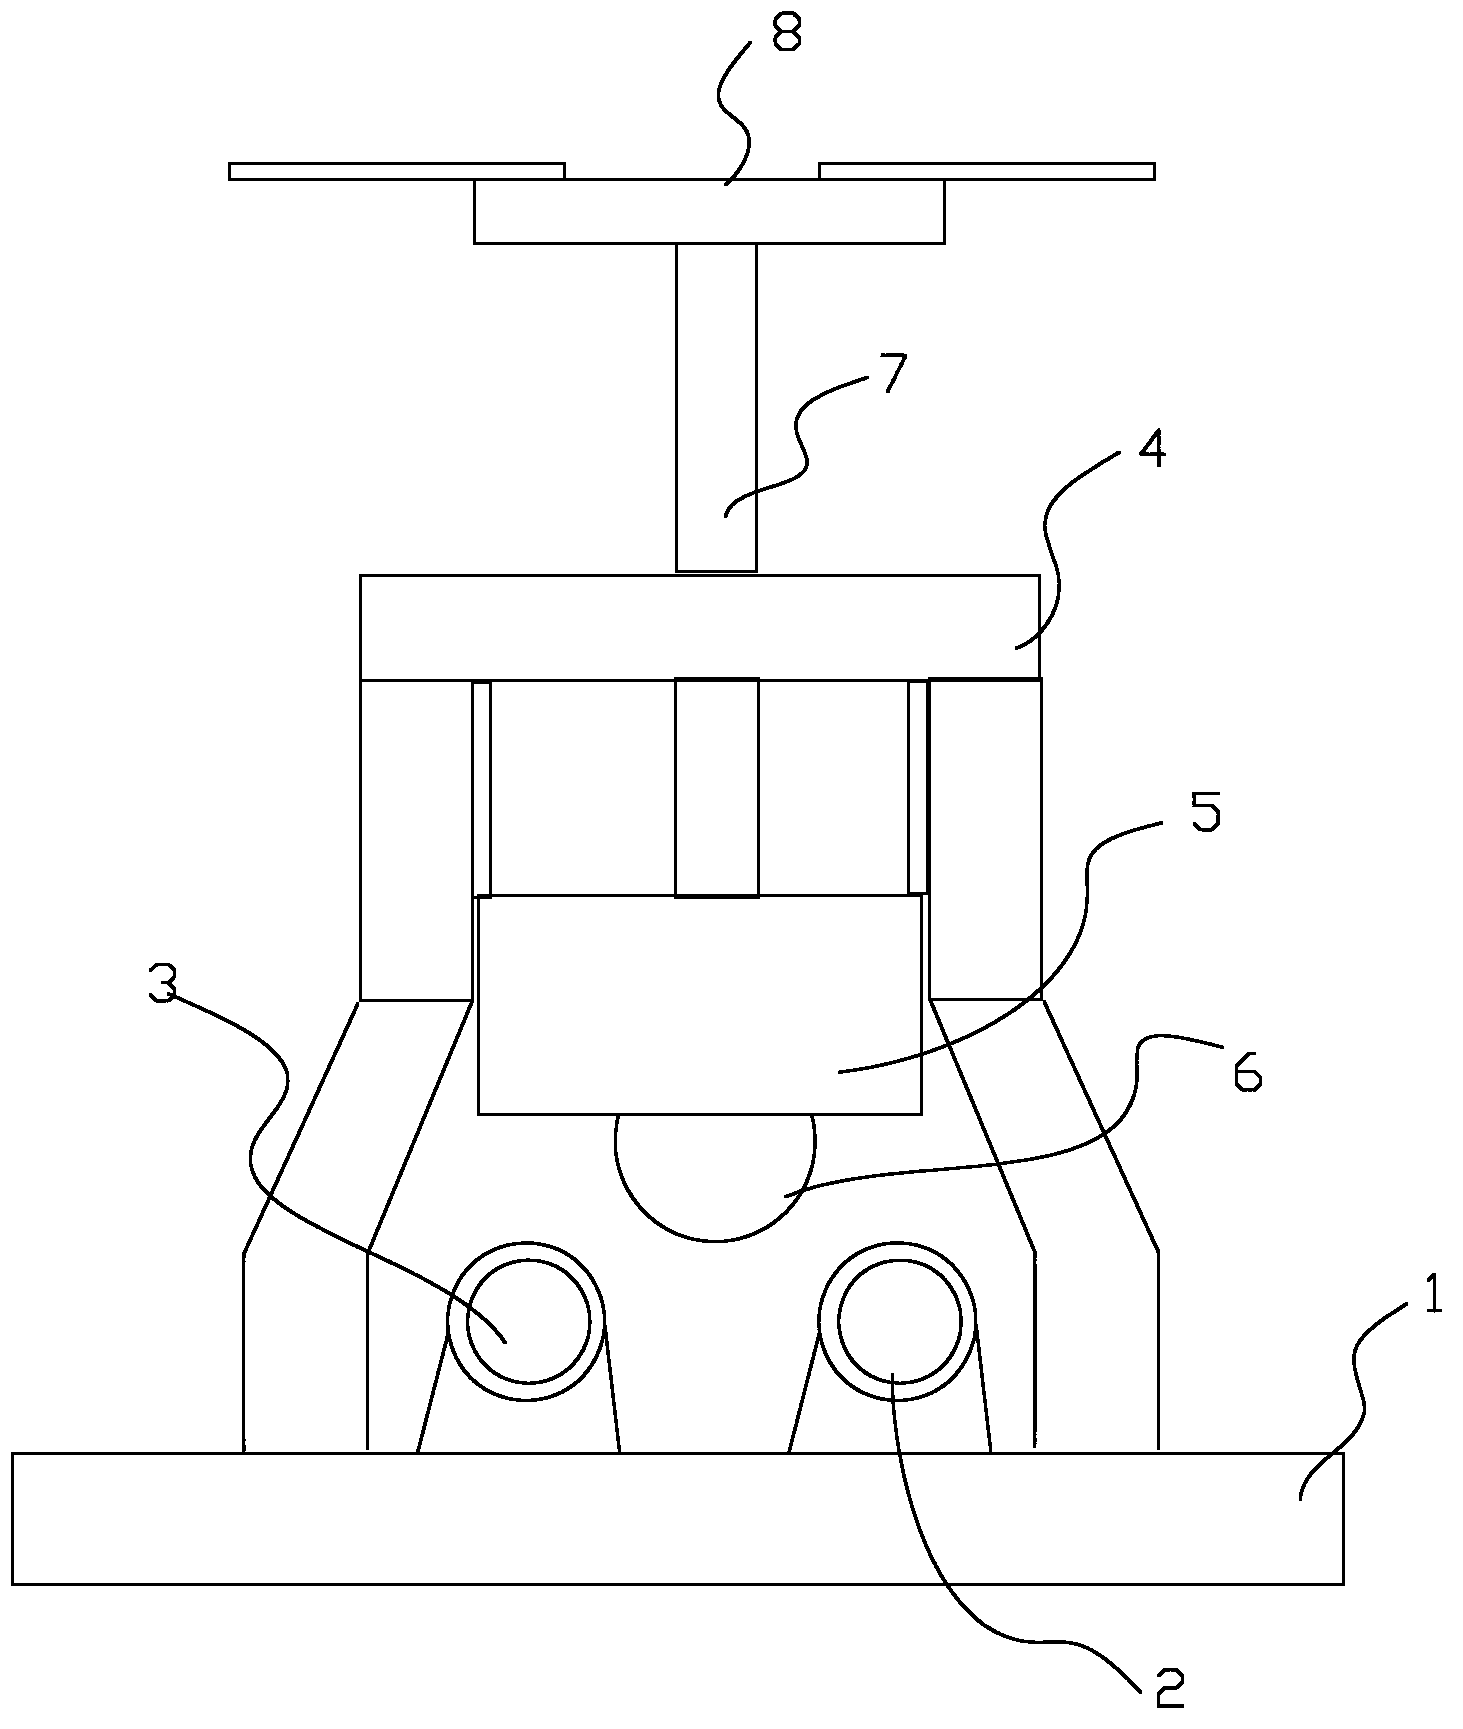 Processing device for arc plates